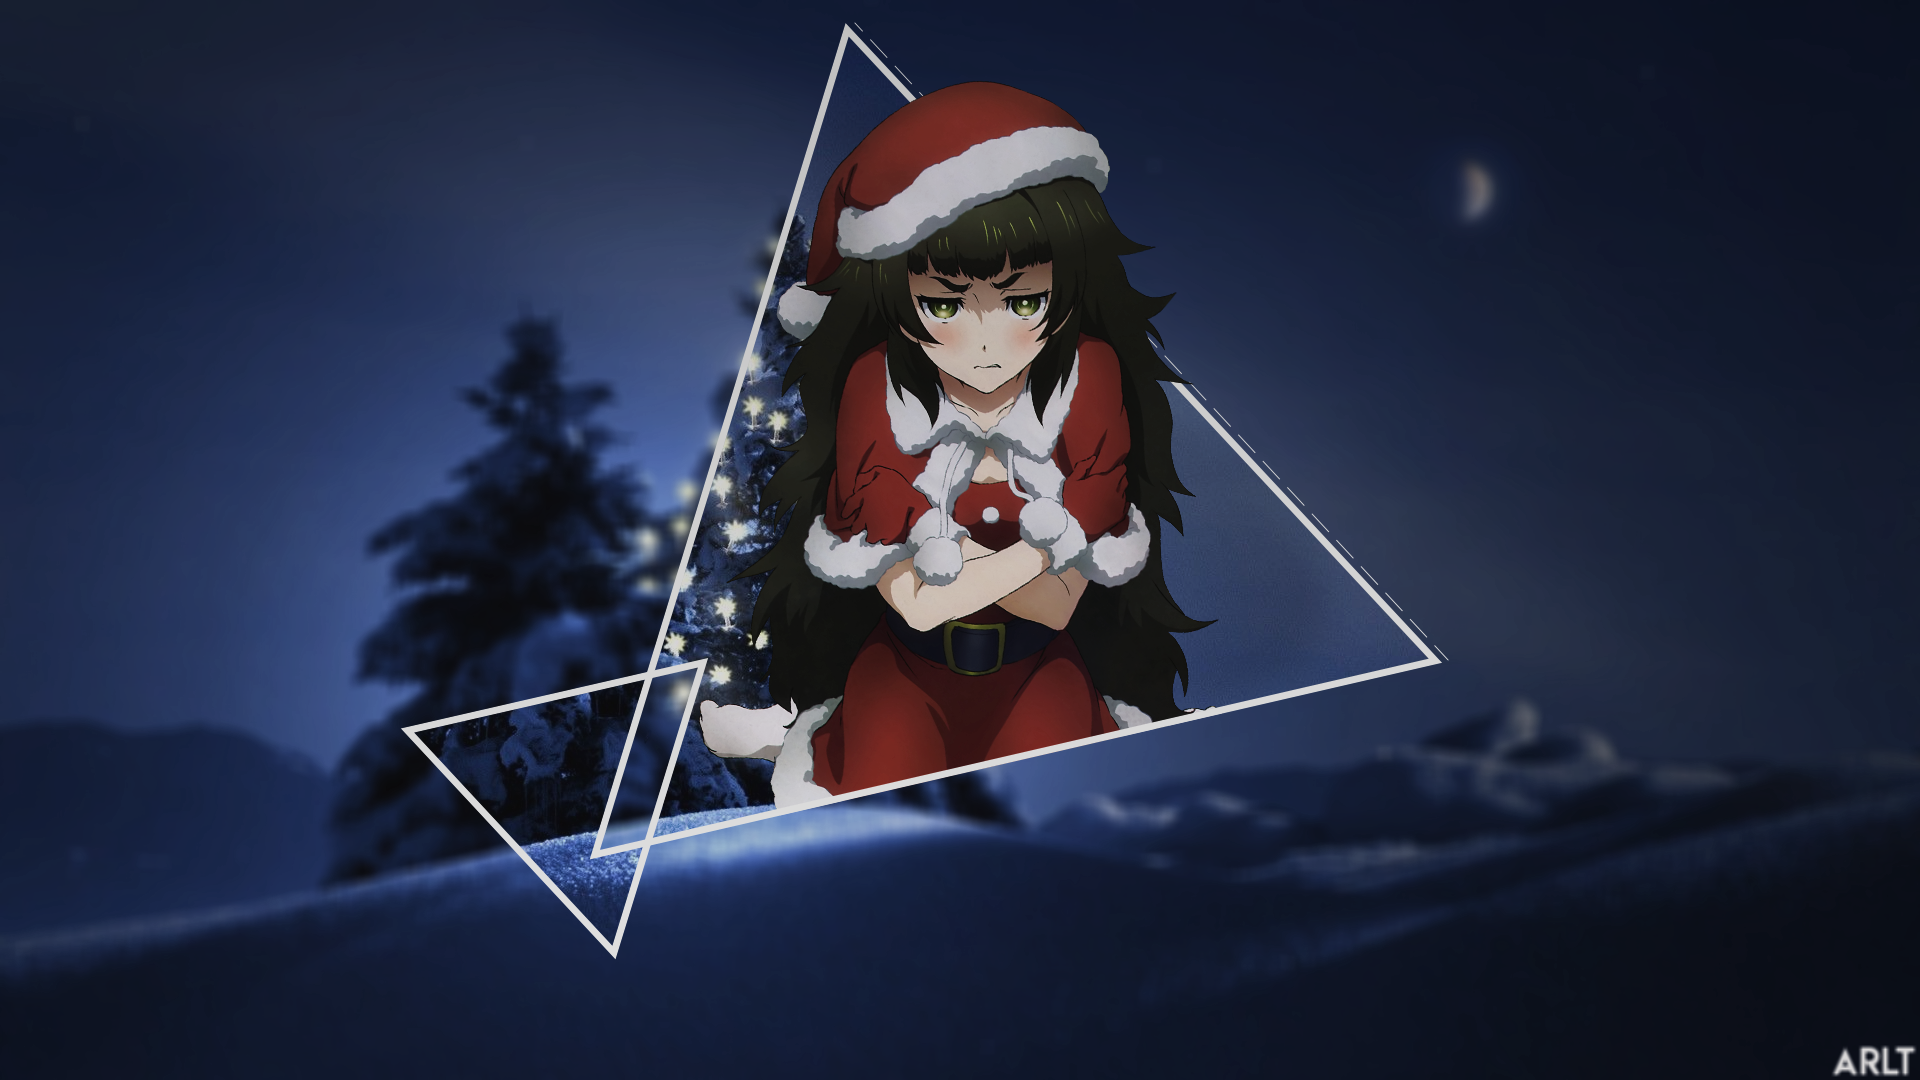 Anime 1920x1080 Steins;Gate anime girls picture-in-picture Christmas